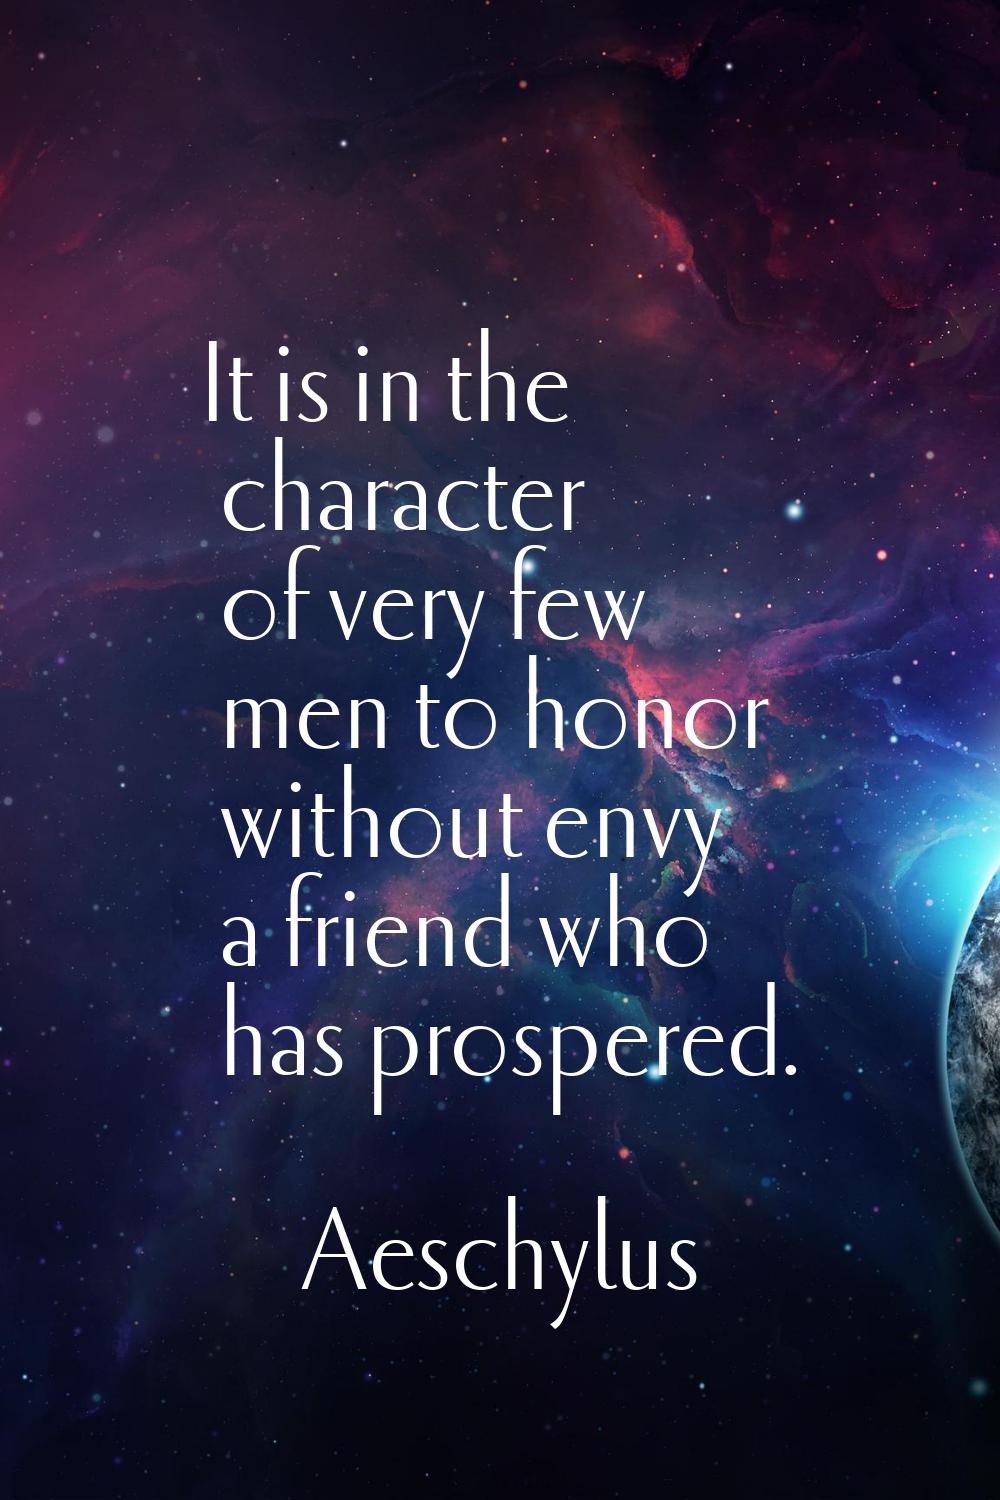 It is in the character of very few men to honor without envy a friend who has prospered.